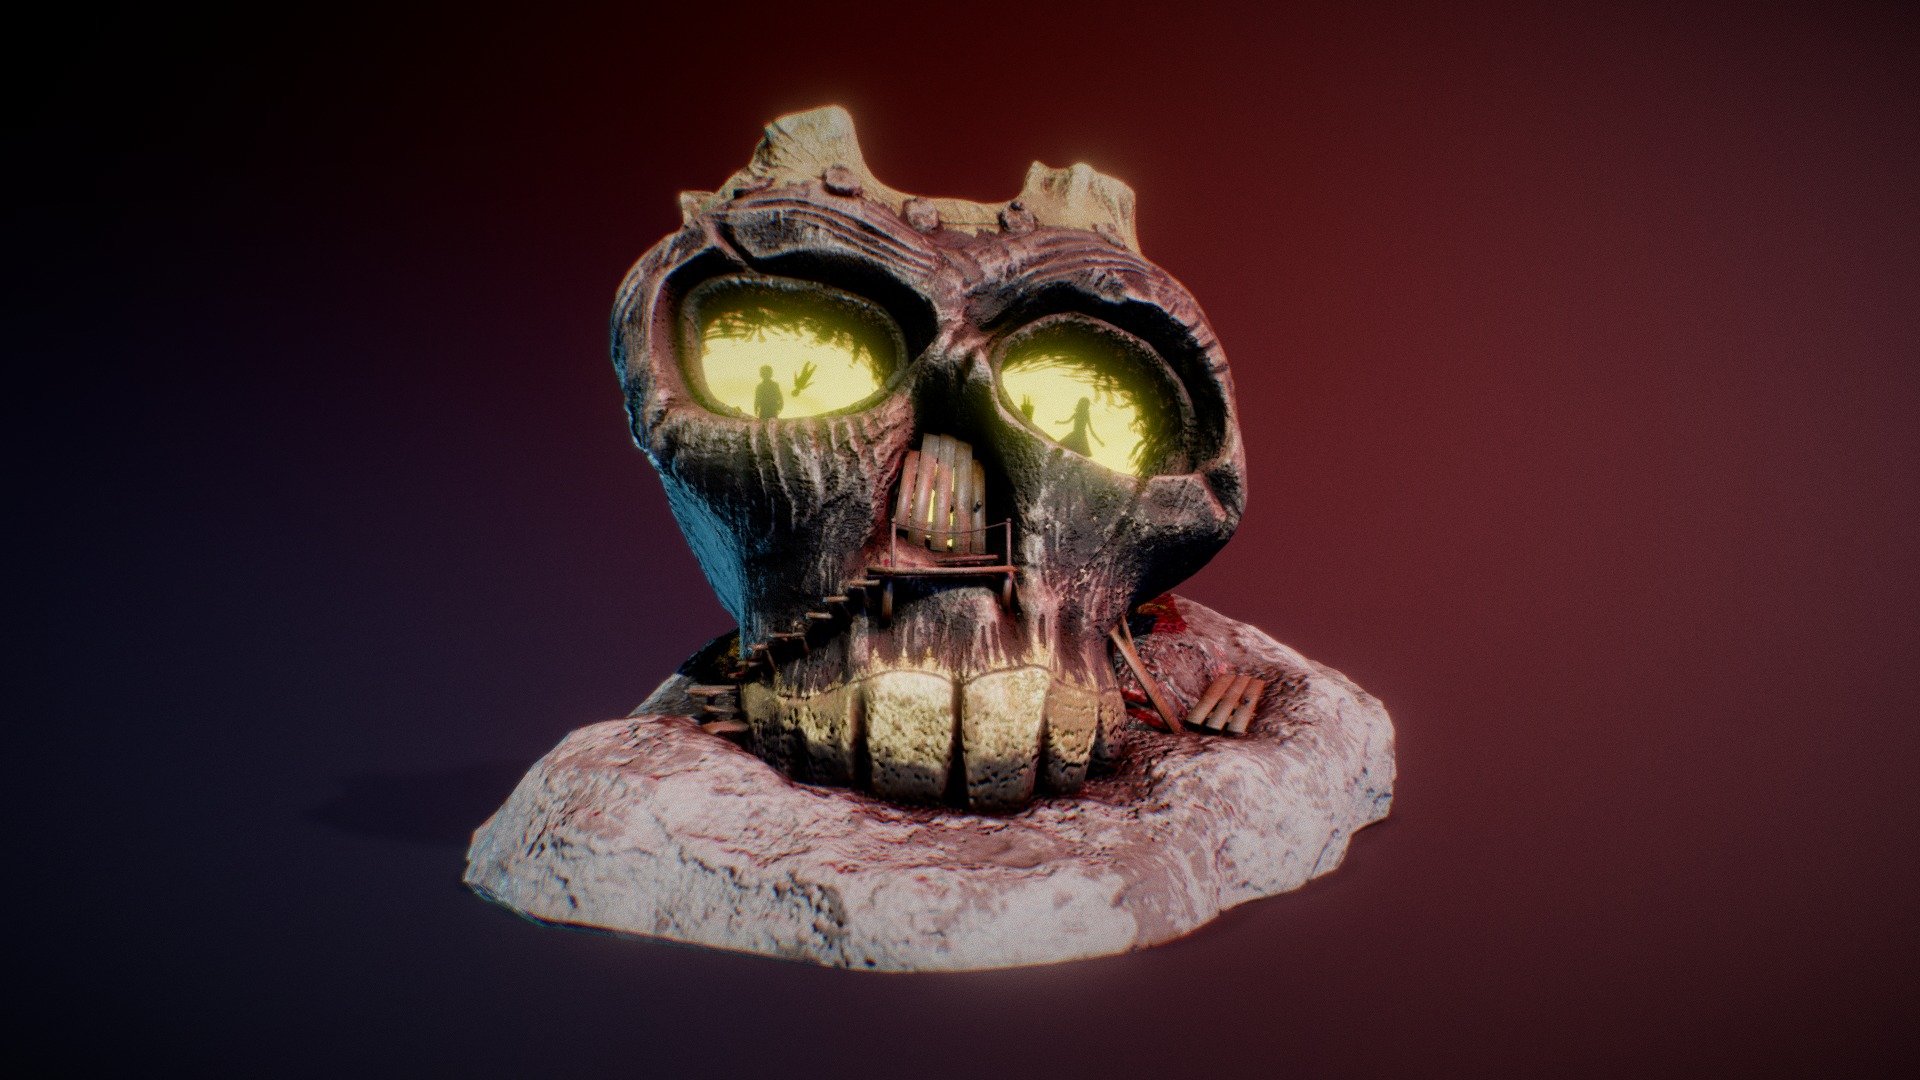 My entry for the #HauntedHouseChallenge 2020 challenge.

We don't have much Halloween here in the Netherlands, but we should!! Great fun again to participate and create something for this kind of challenges.



Workflow:

Zbrush for basic low and high poly skull / attributes modeling

Blender for UVmapping

Substance Painter for texturing

Back to Blender for rendering - Haunted House - Skull - Download Free 3D model by hullo 3d model